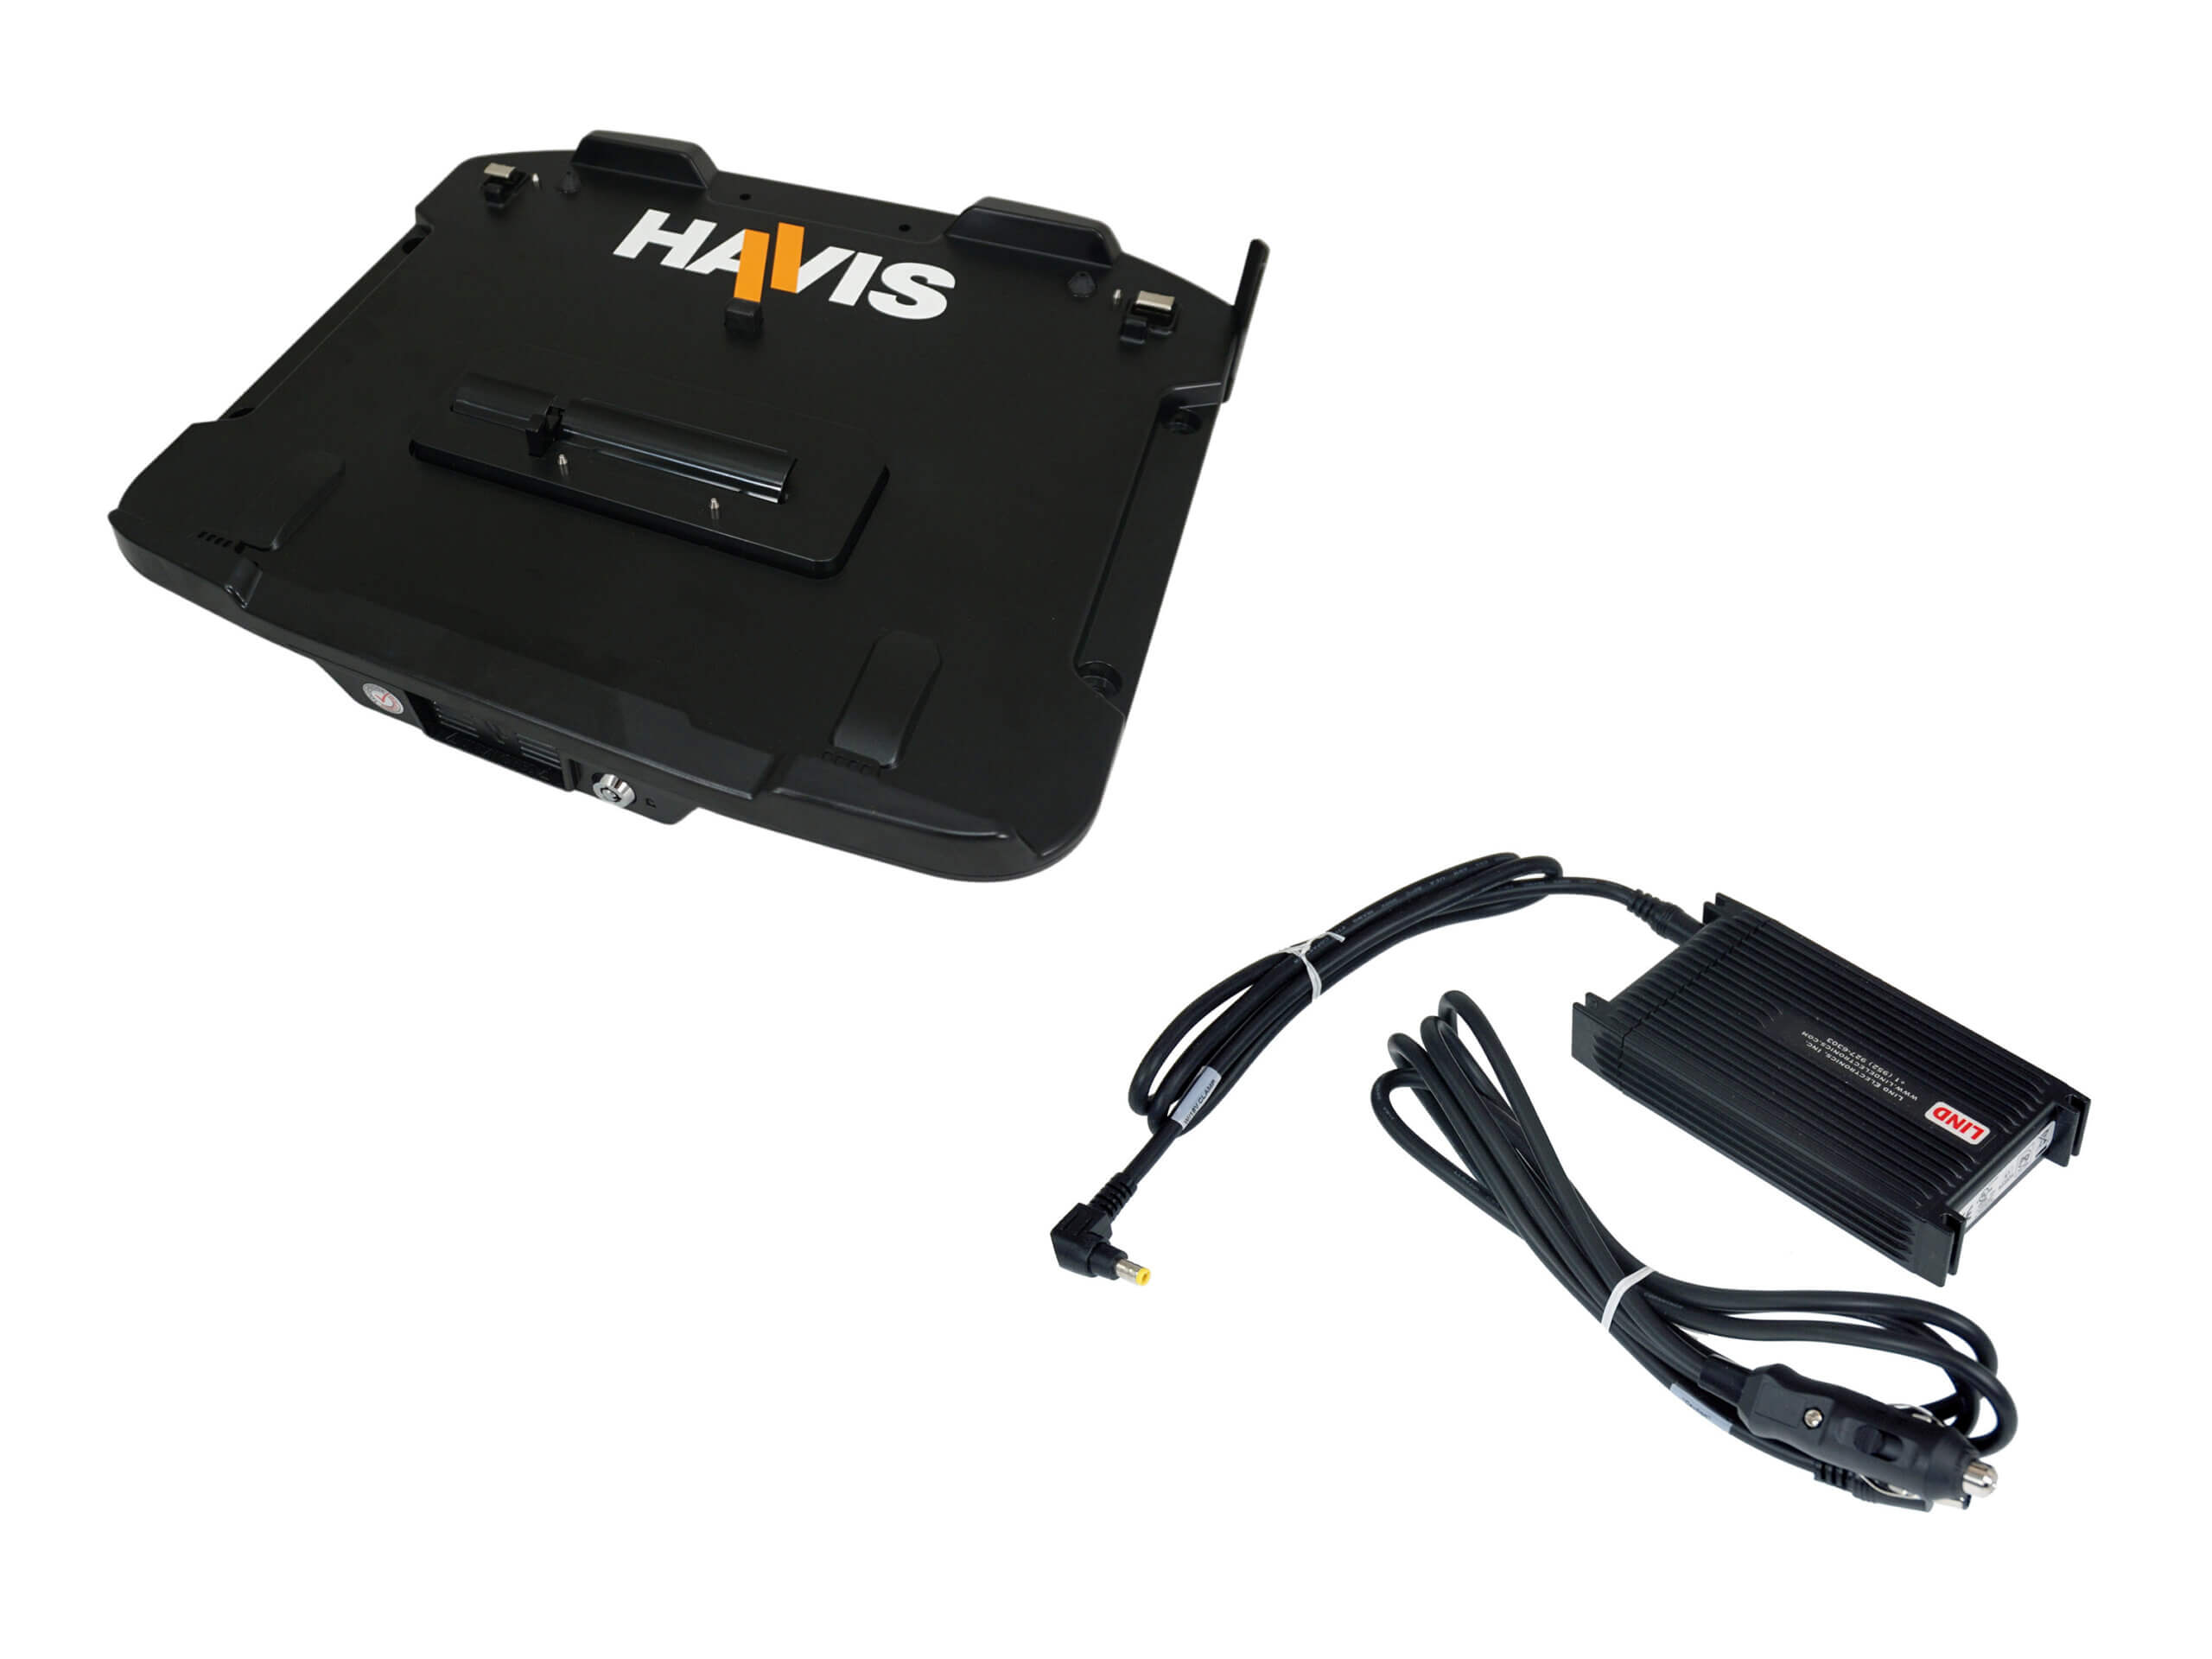 Docking Station For Panasonic TOUGHBOOK 40 Laptop with Advanced Port Replication & LIND Power Supply